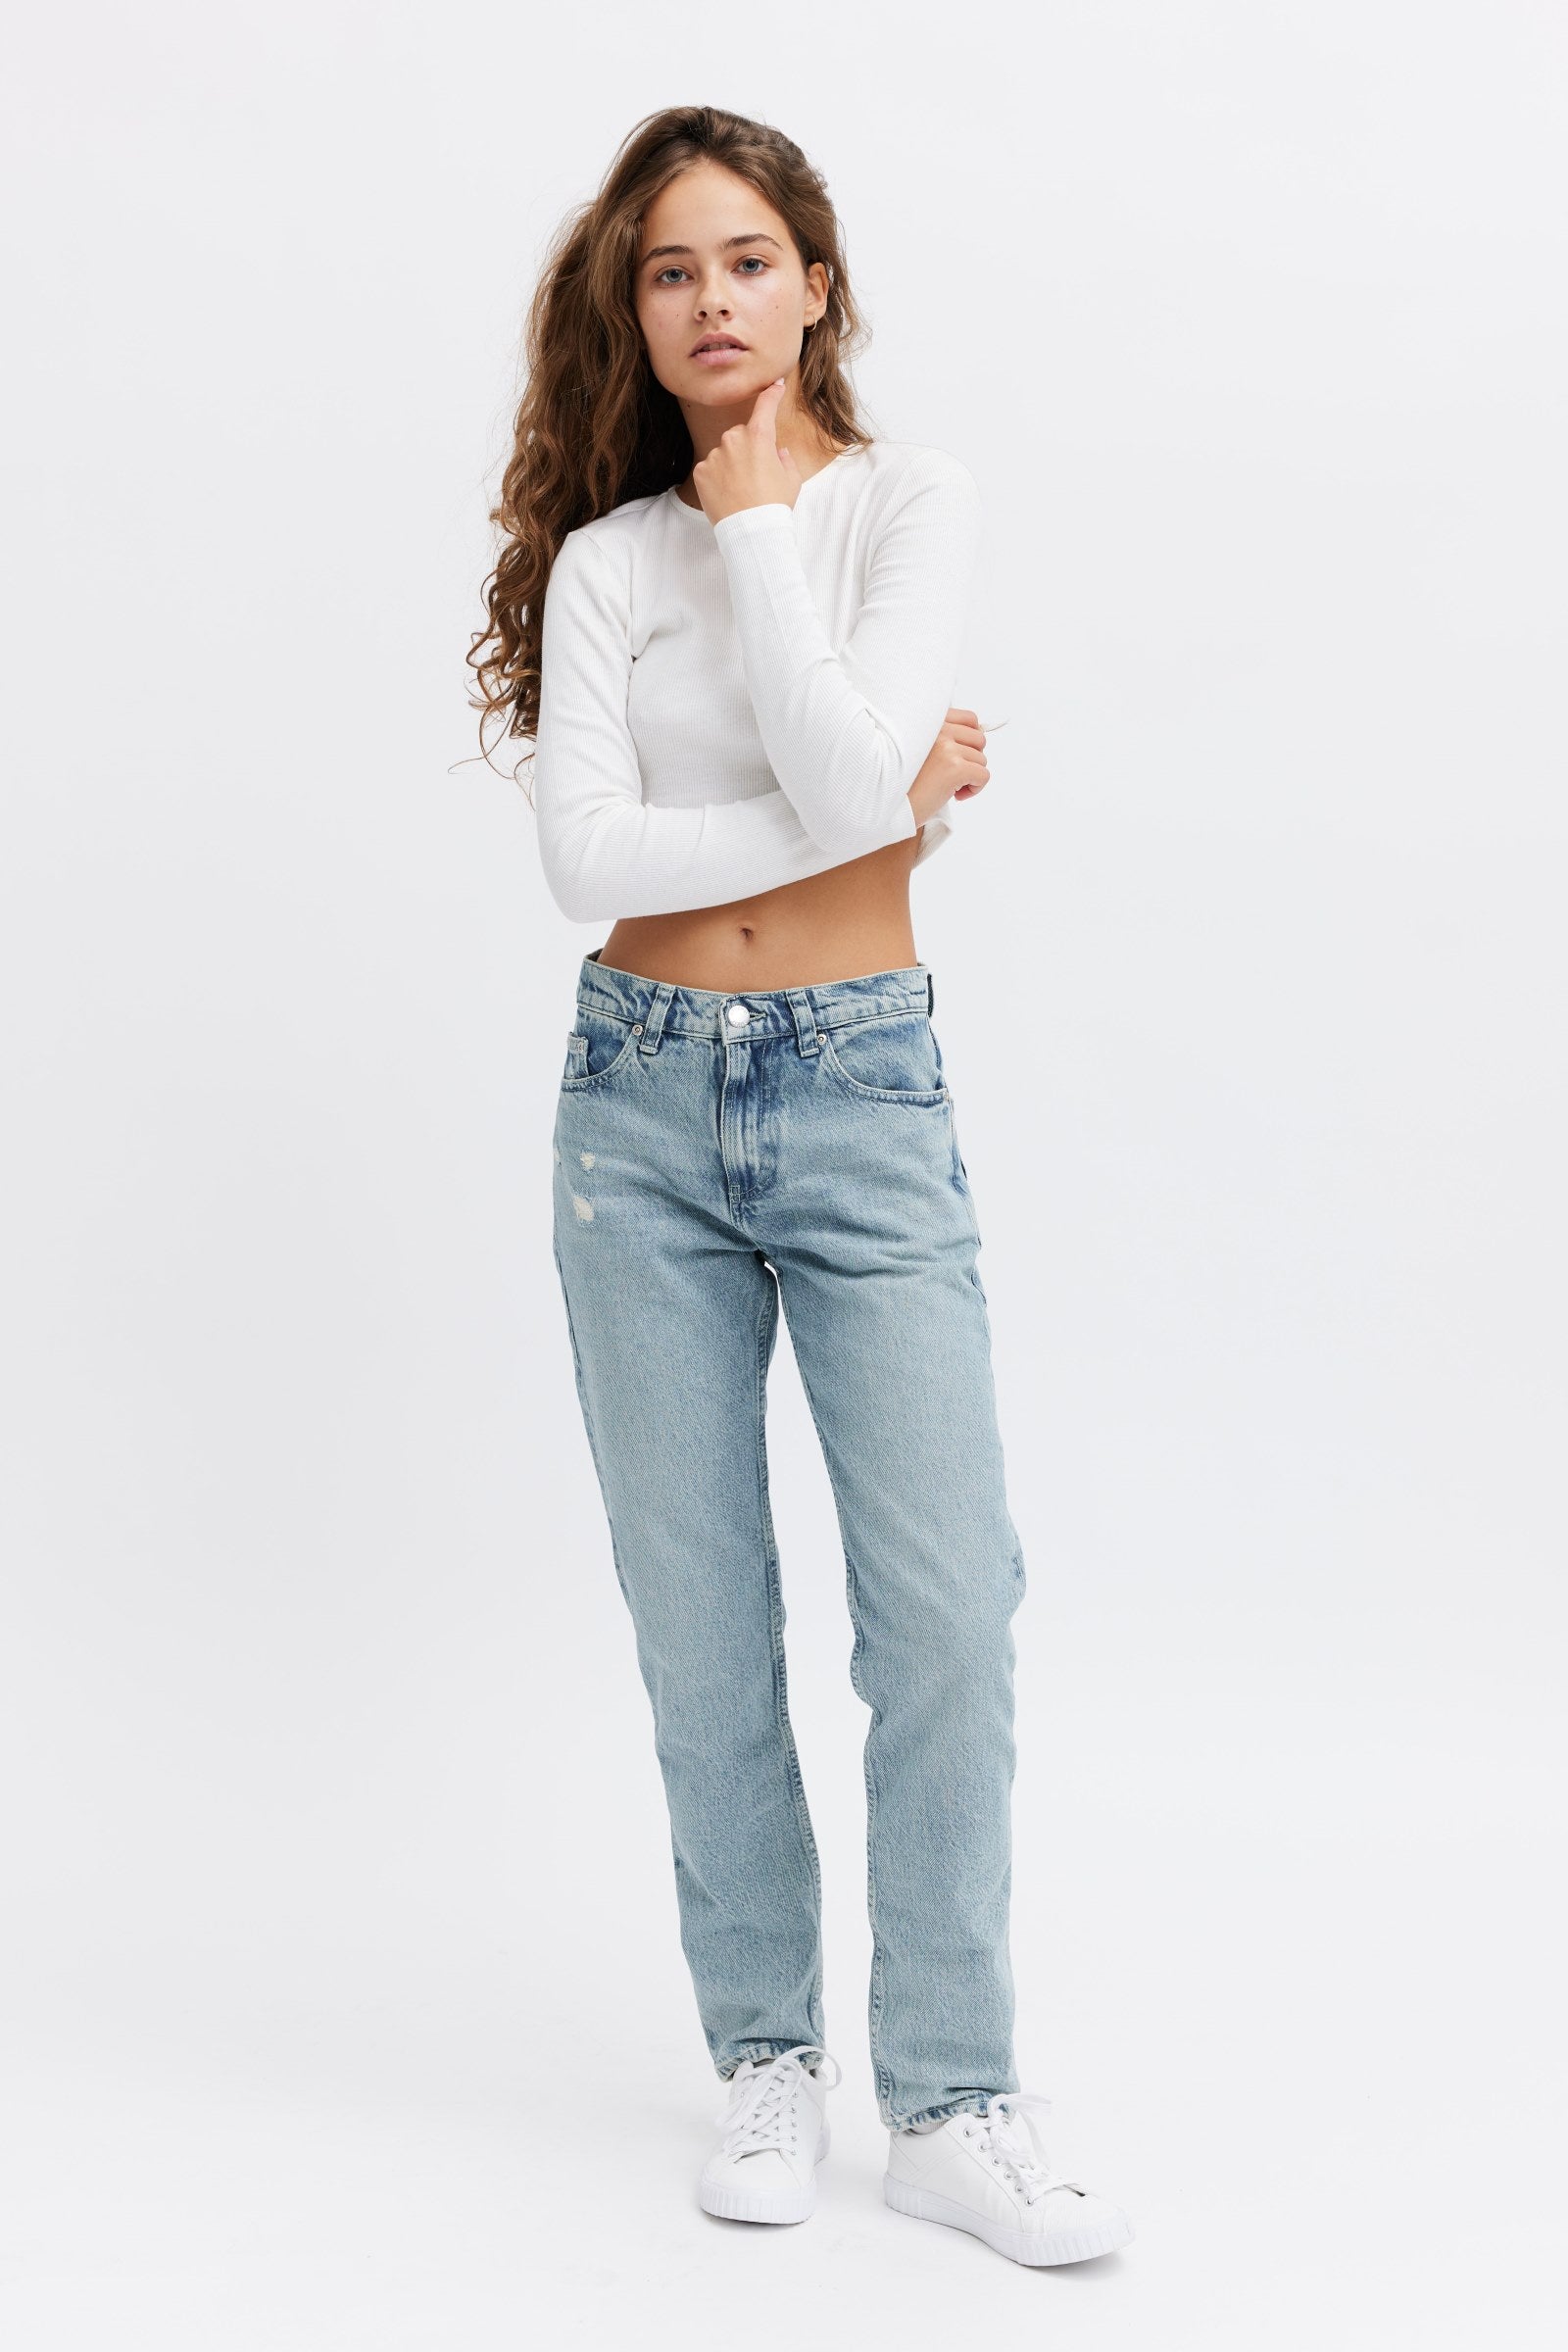 Women's Classic Jeans - 100% Organic Cotton - Perfect fit for every body type 